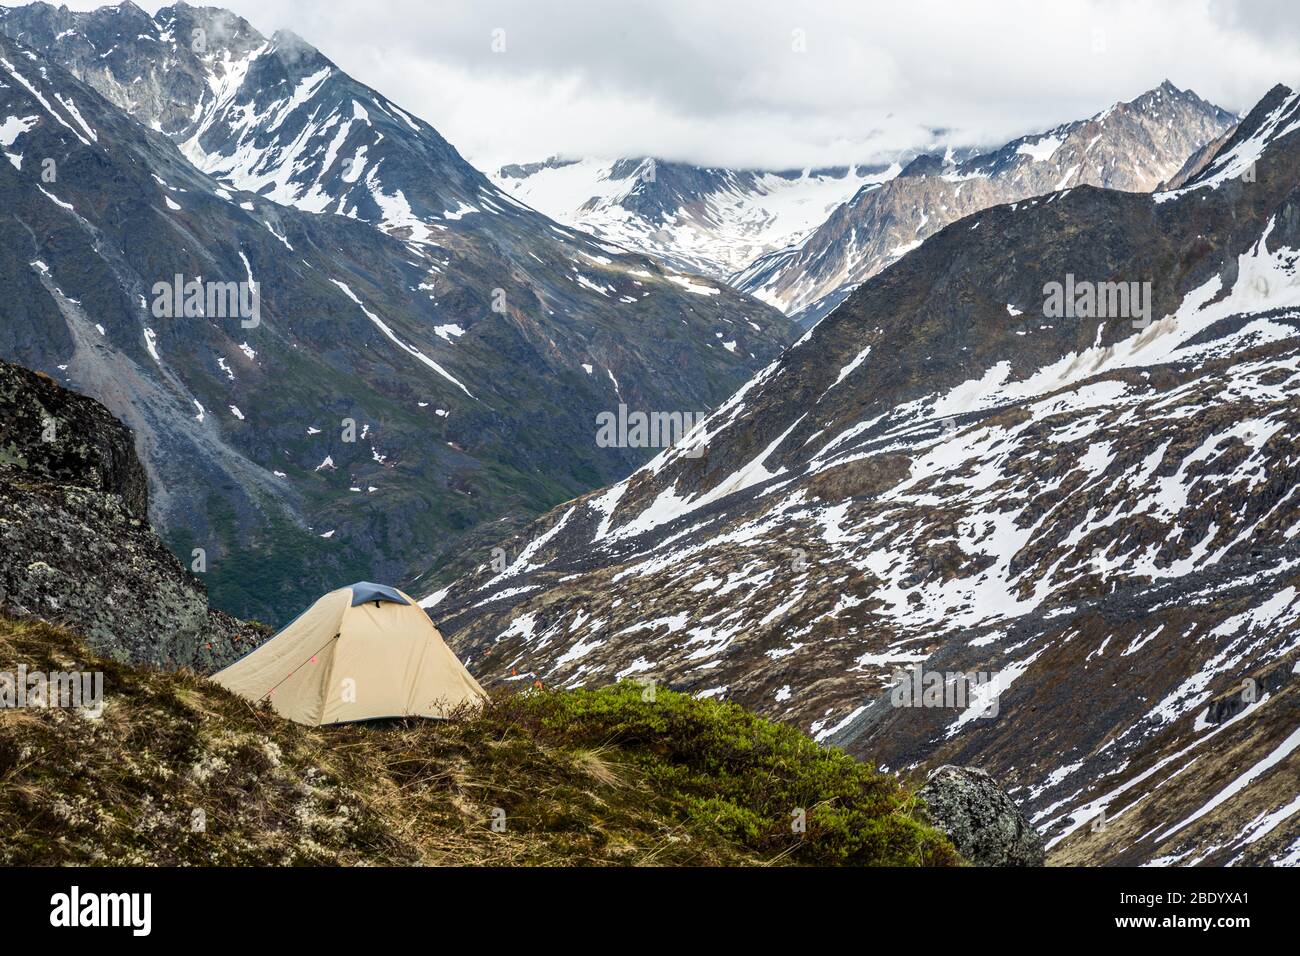 Tan and grey tent on narrow ledge of tundra and rock overlooking a large valley. Deep in the wilderness of the Talkeetna Mountains of remote Alaska. Stock Photo